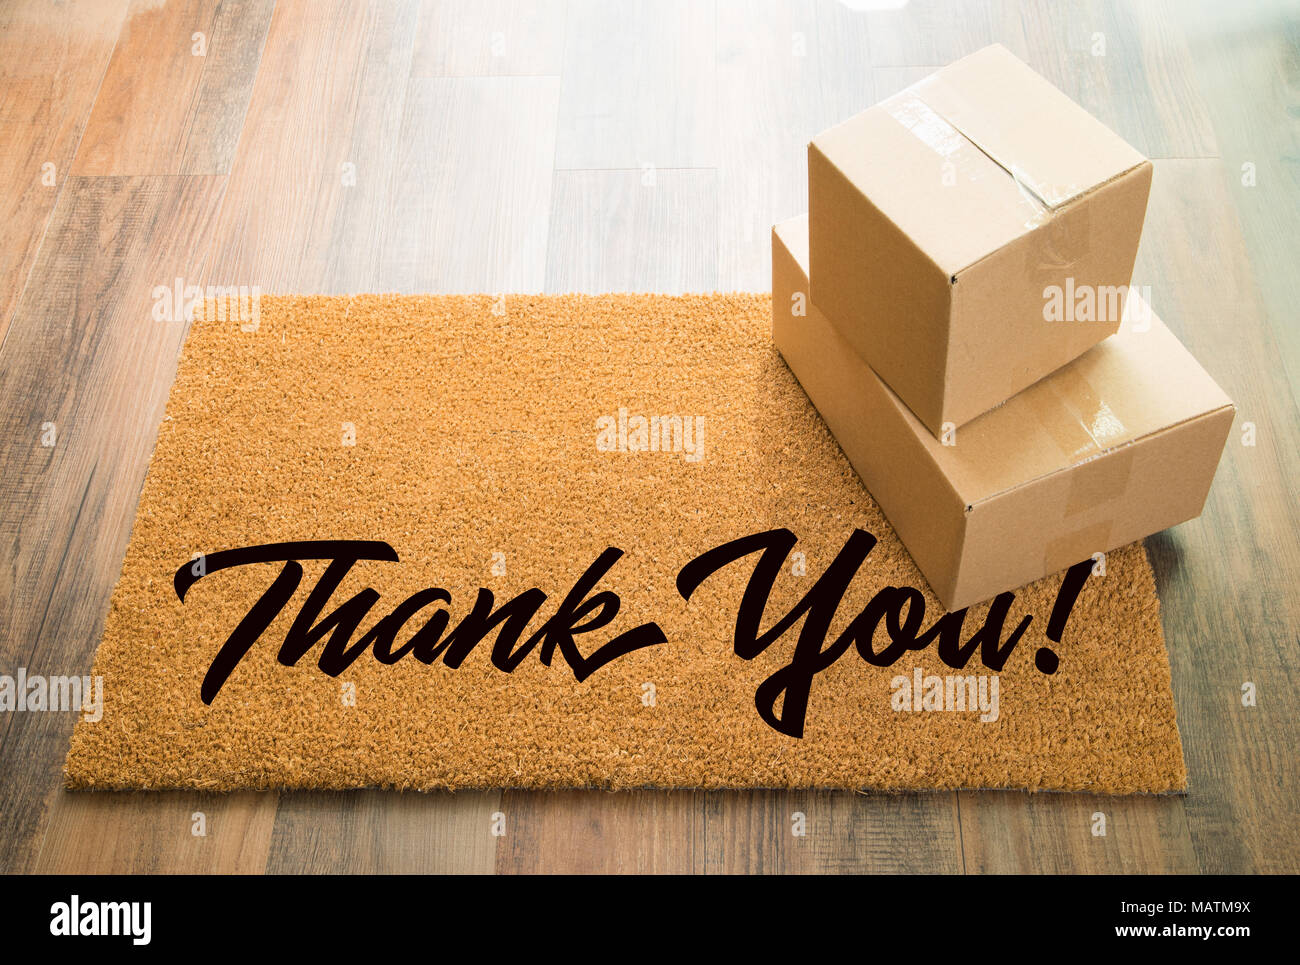 Thank You Welcome Mat On Wood Floor With Shipment of Boxes. Stock Photo